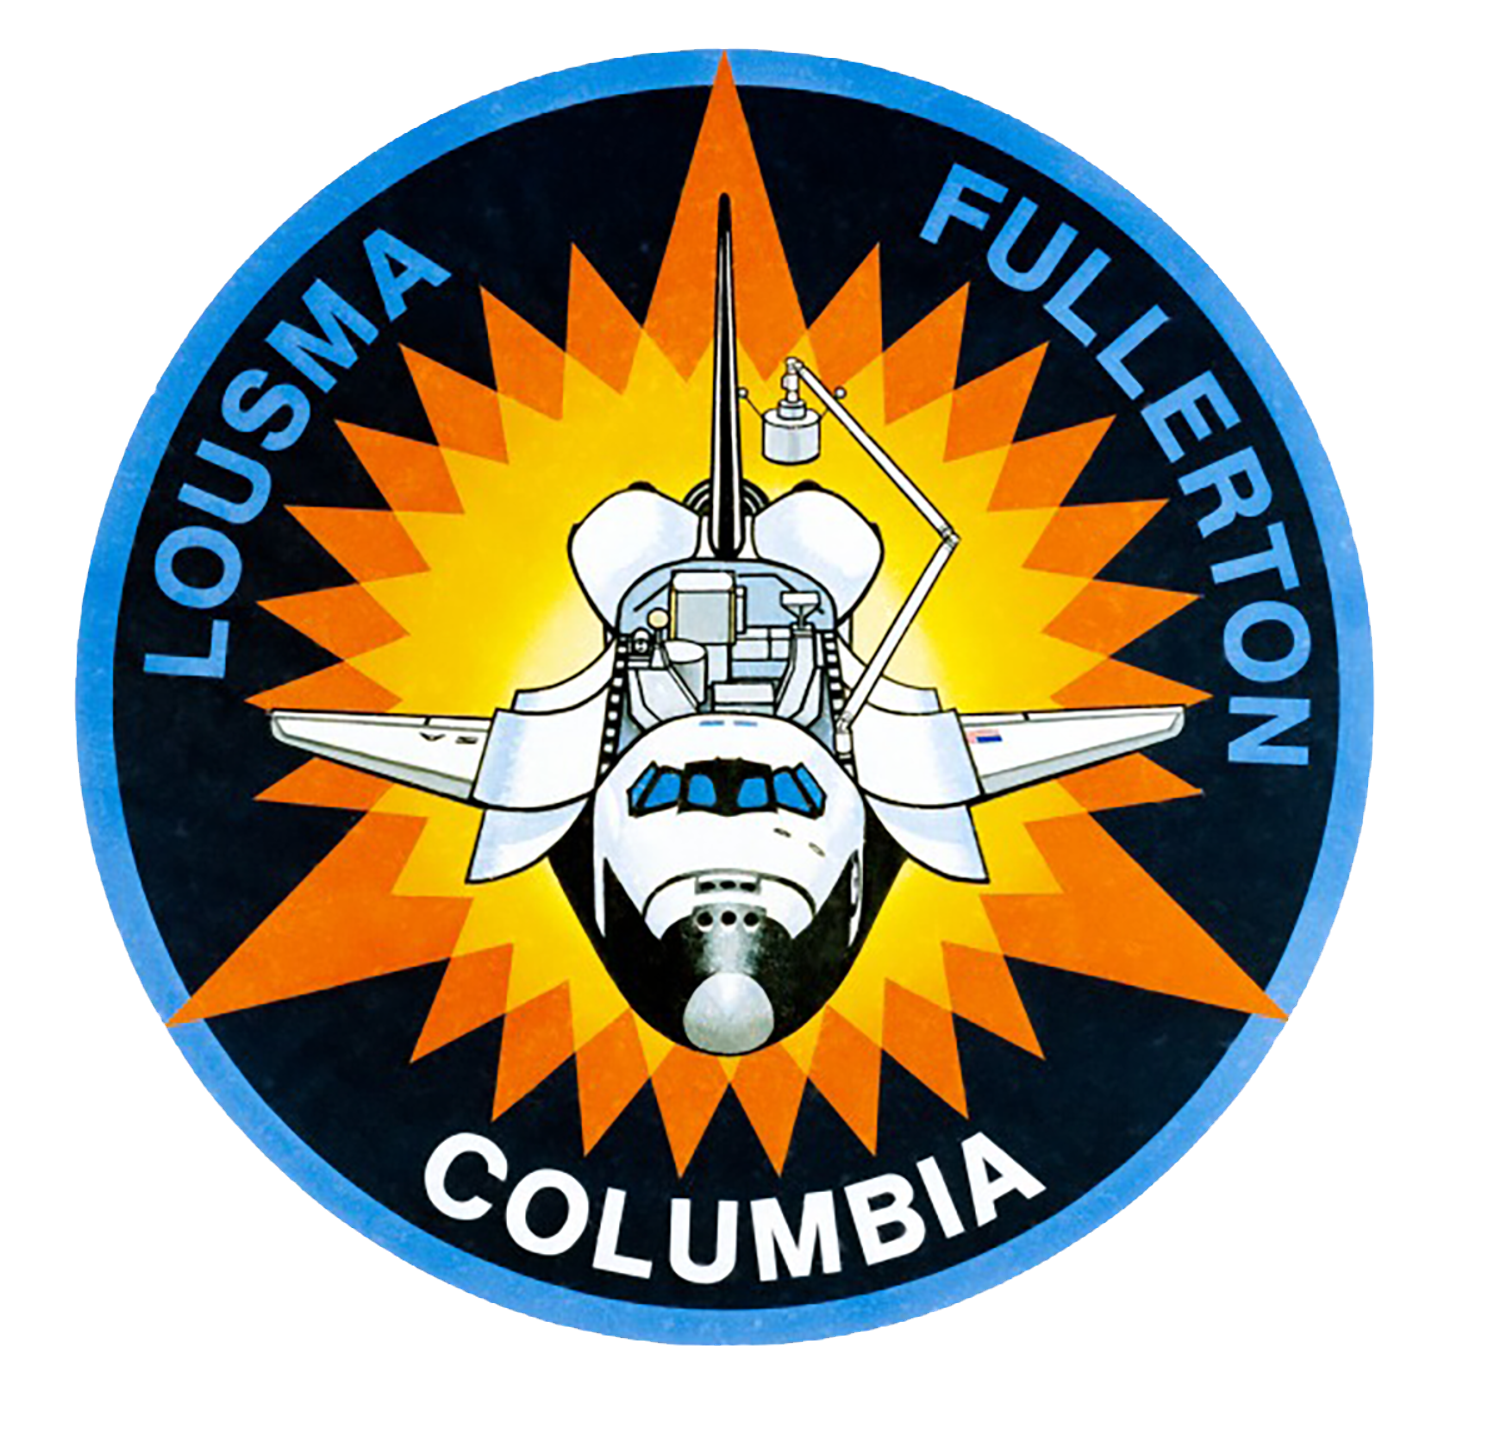 STS-3 (Columbia)